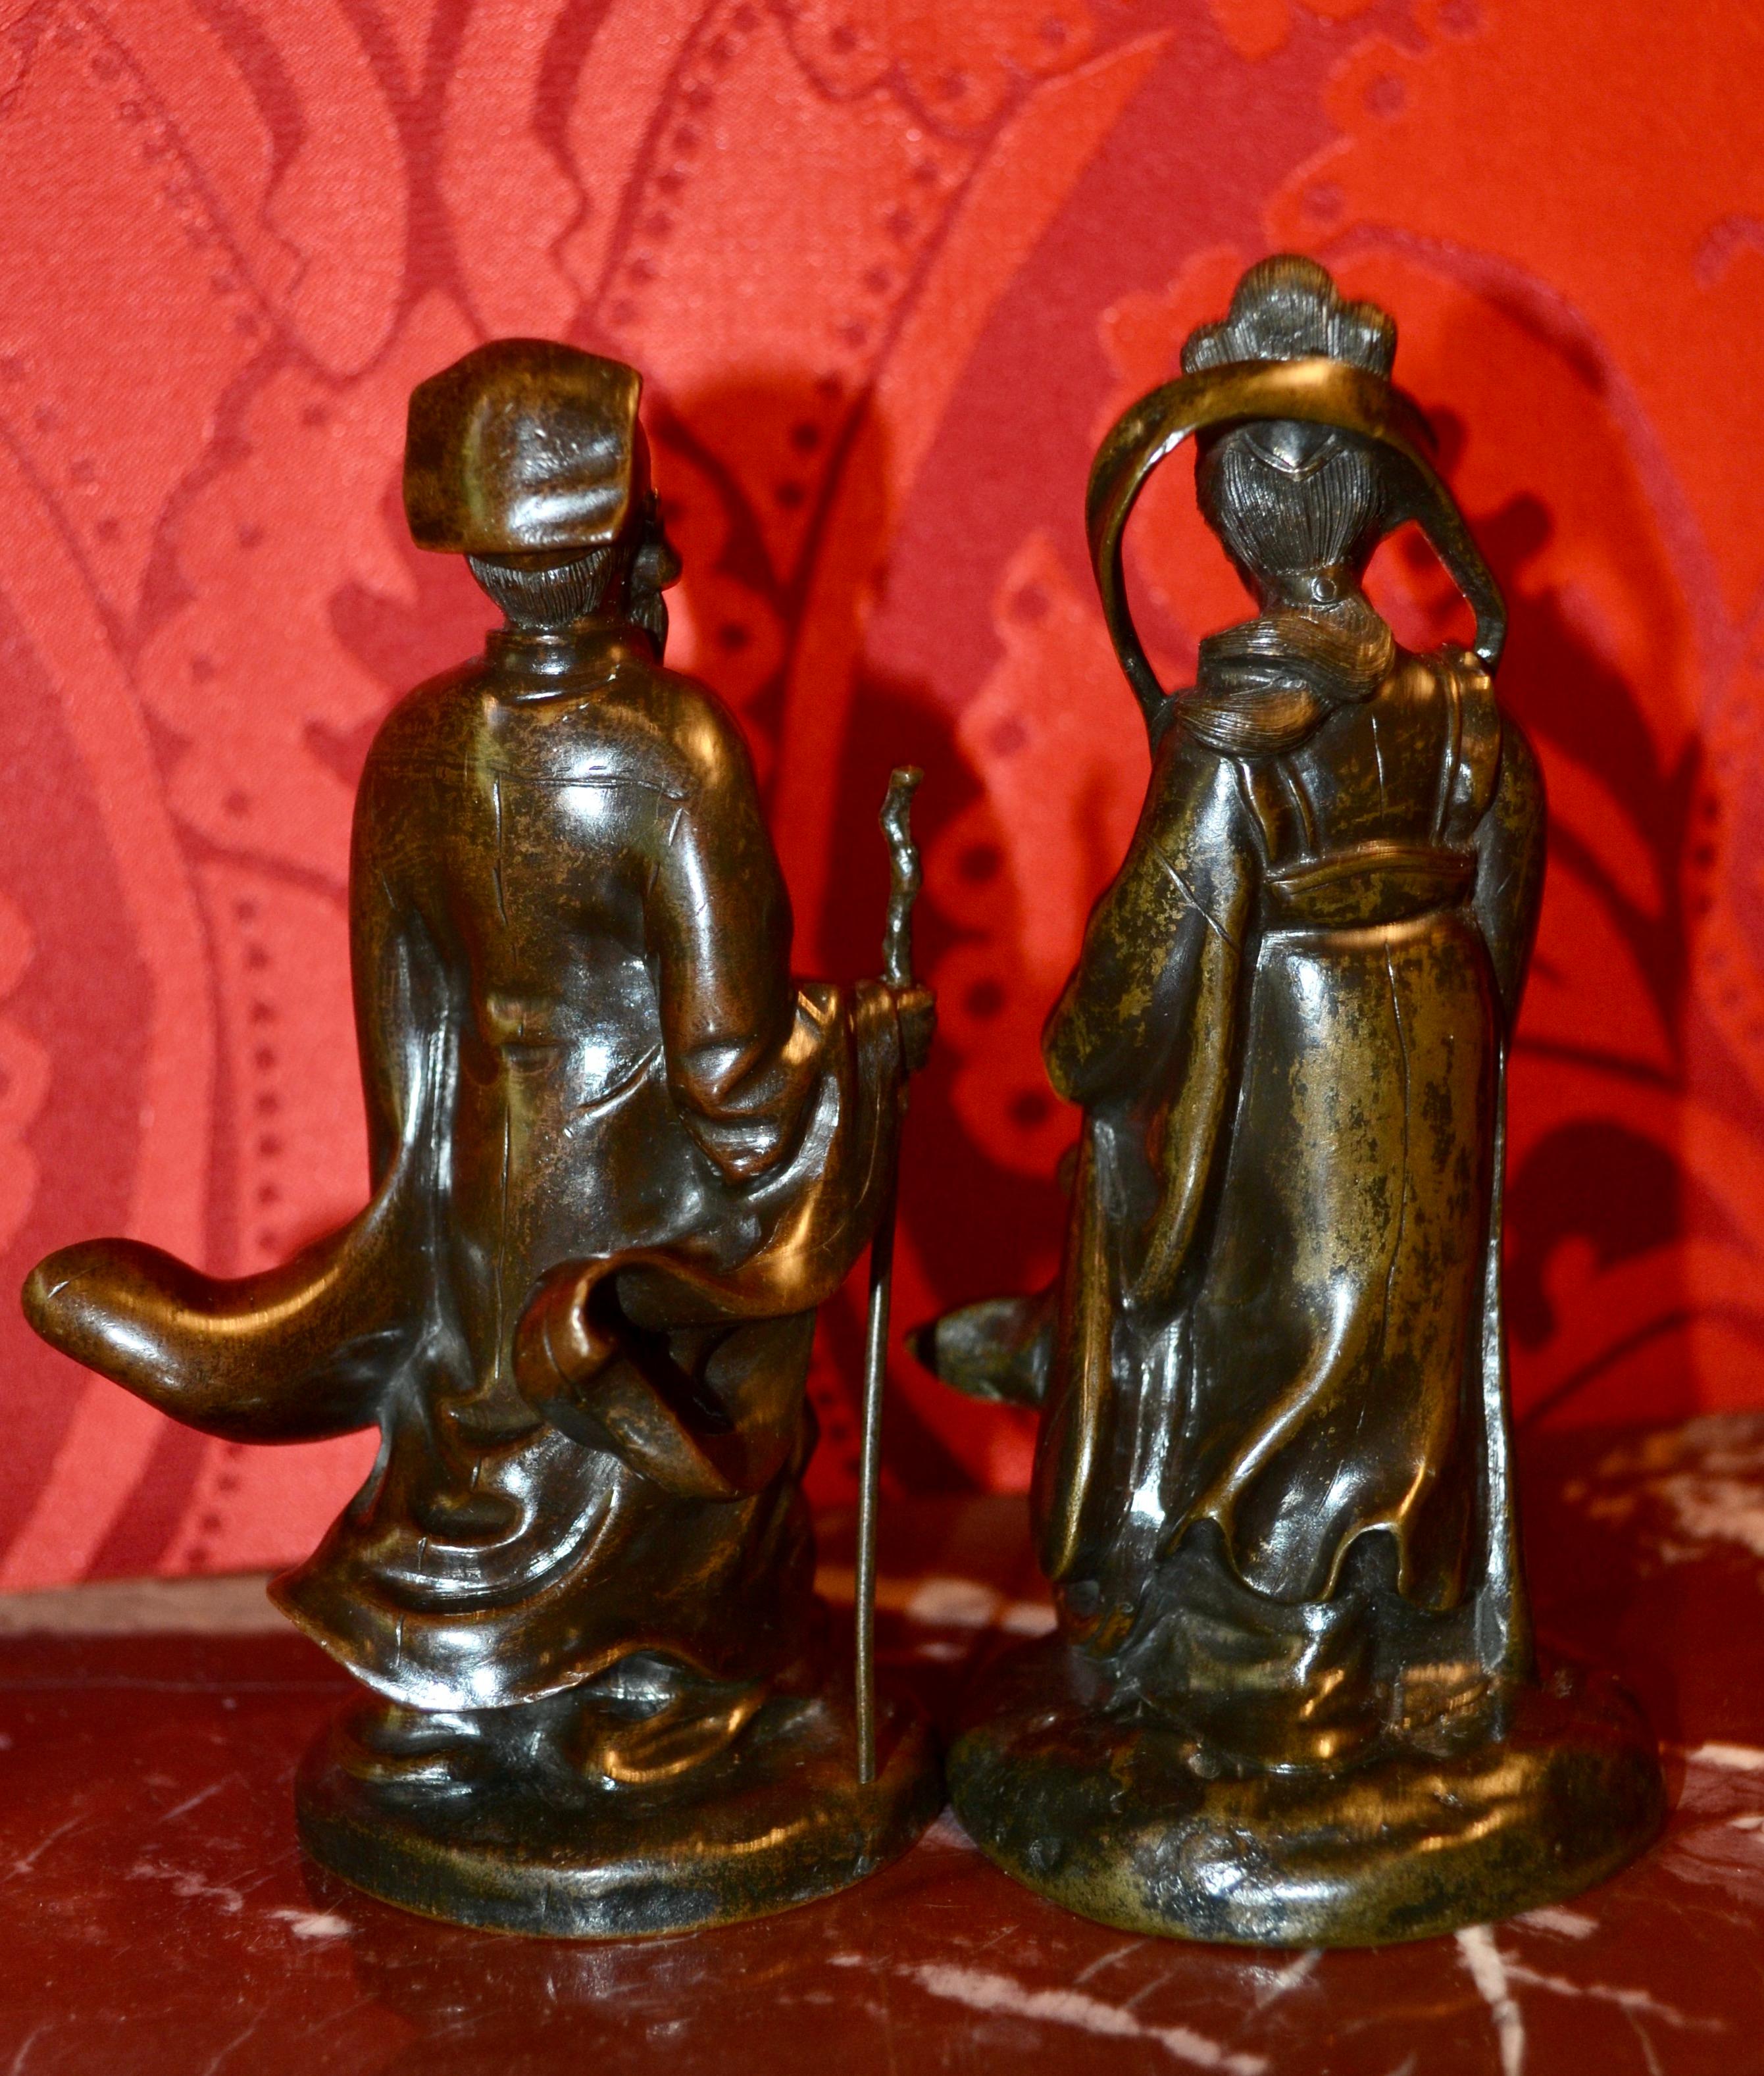 19th Century A Pair of Small 19 Century Chinese Patinated Bronze Statues of Gods or Deities   For Sale